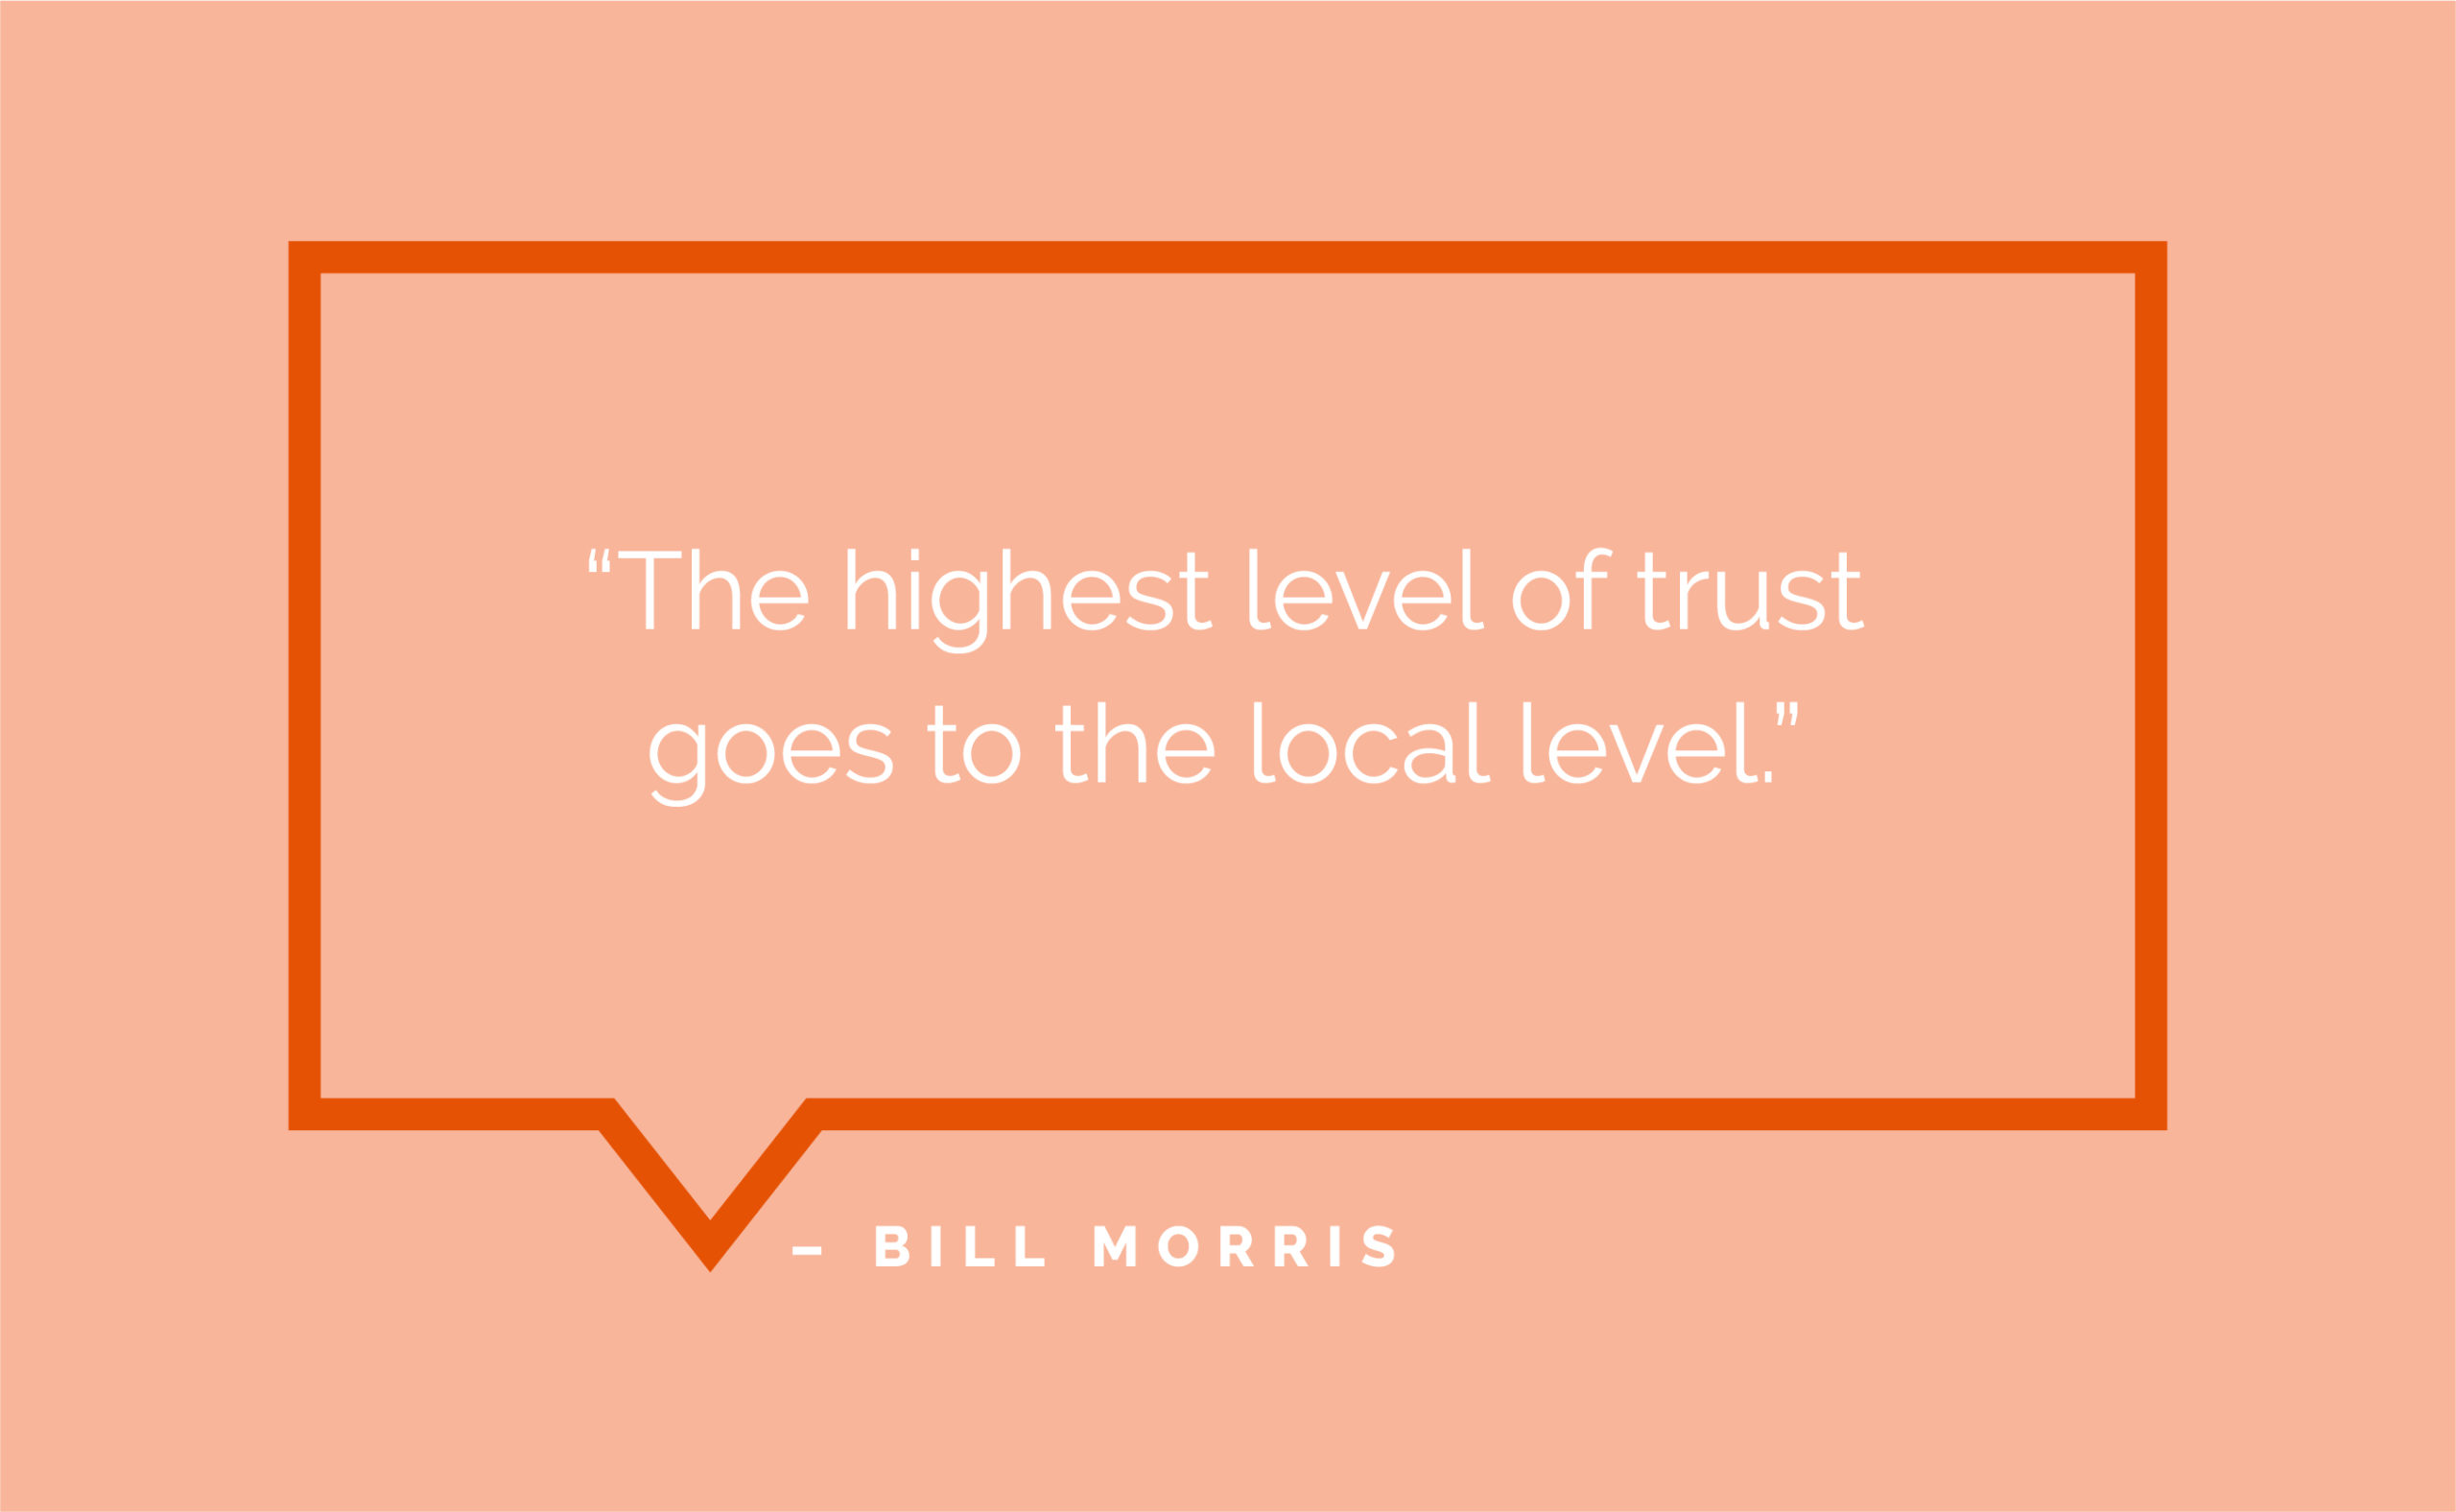 “The highest level of trust goes to the local level.” - Bill Morris